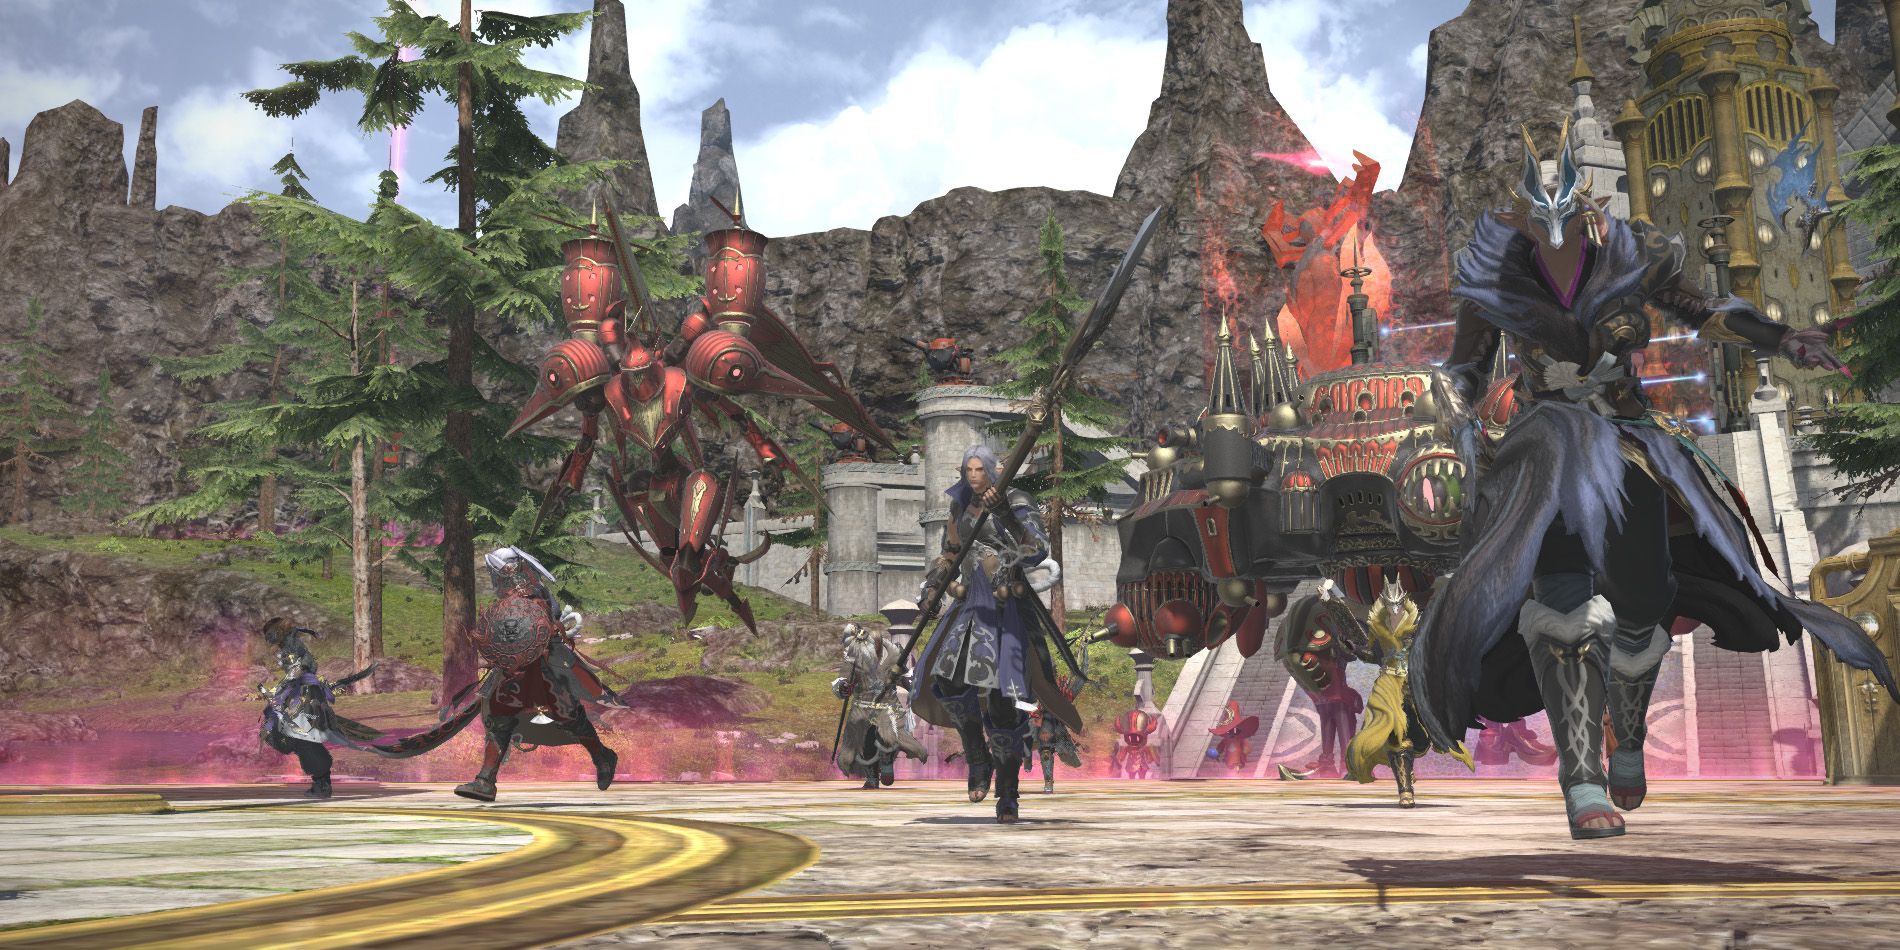 On the Frontlines in Final Fantasy 14